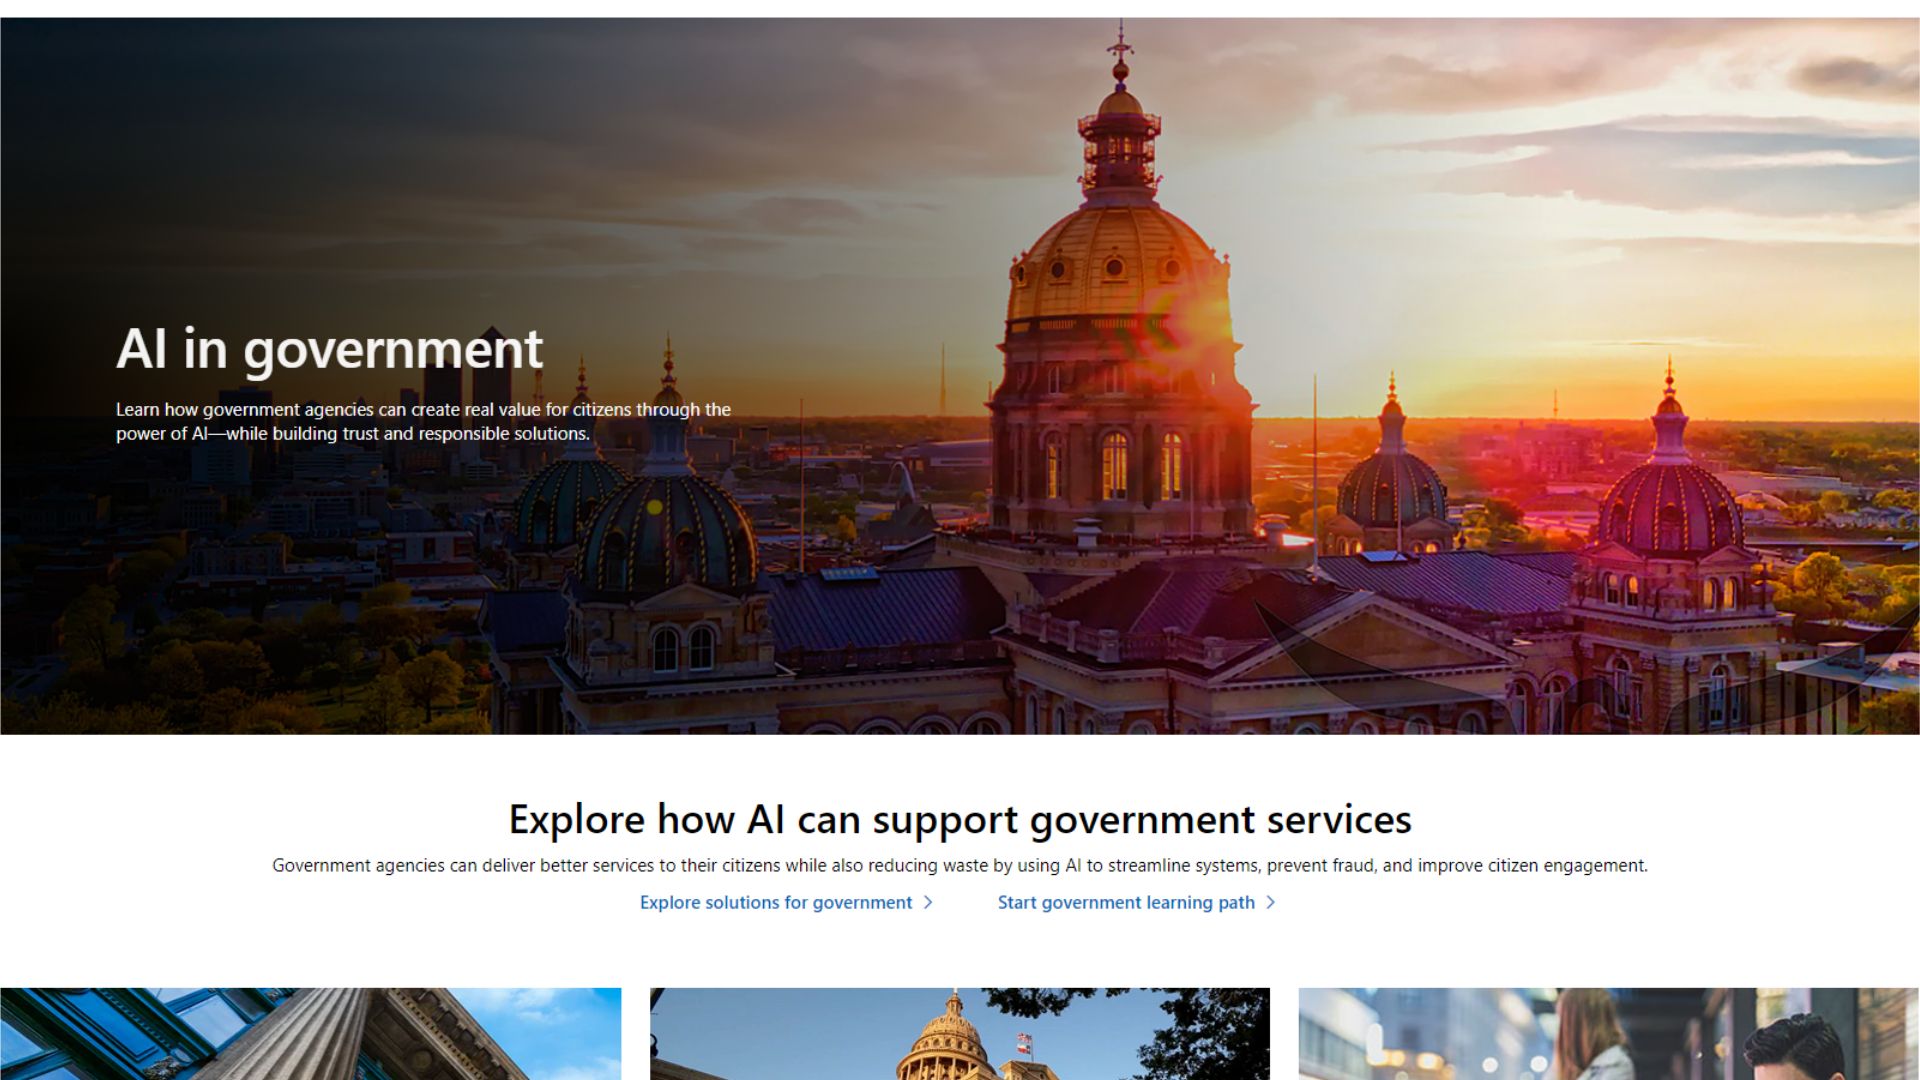 microsoft's ai in government webpage